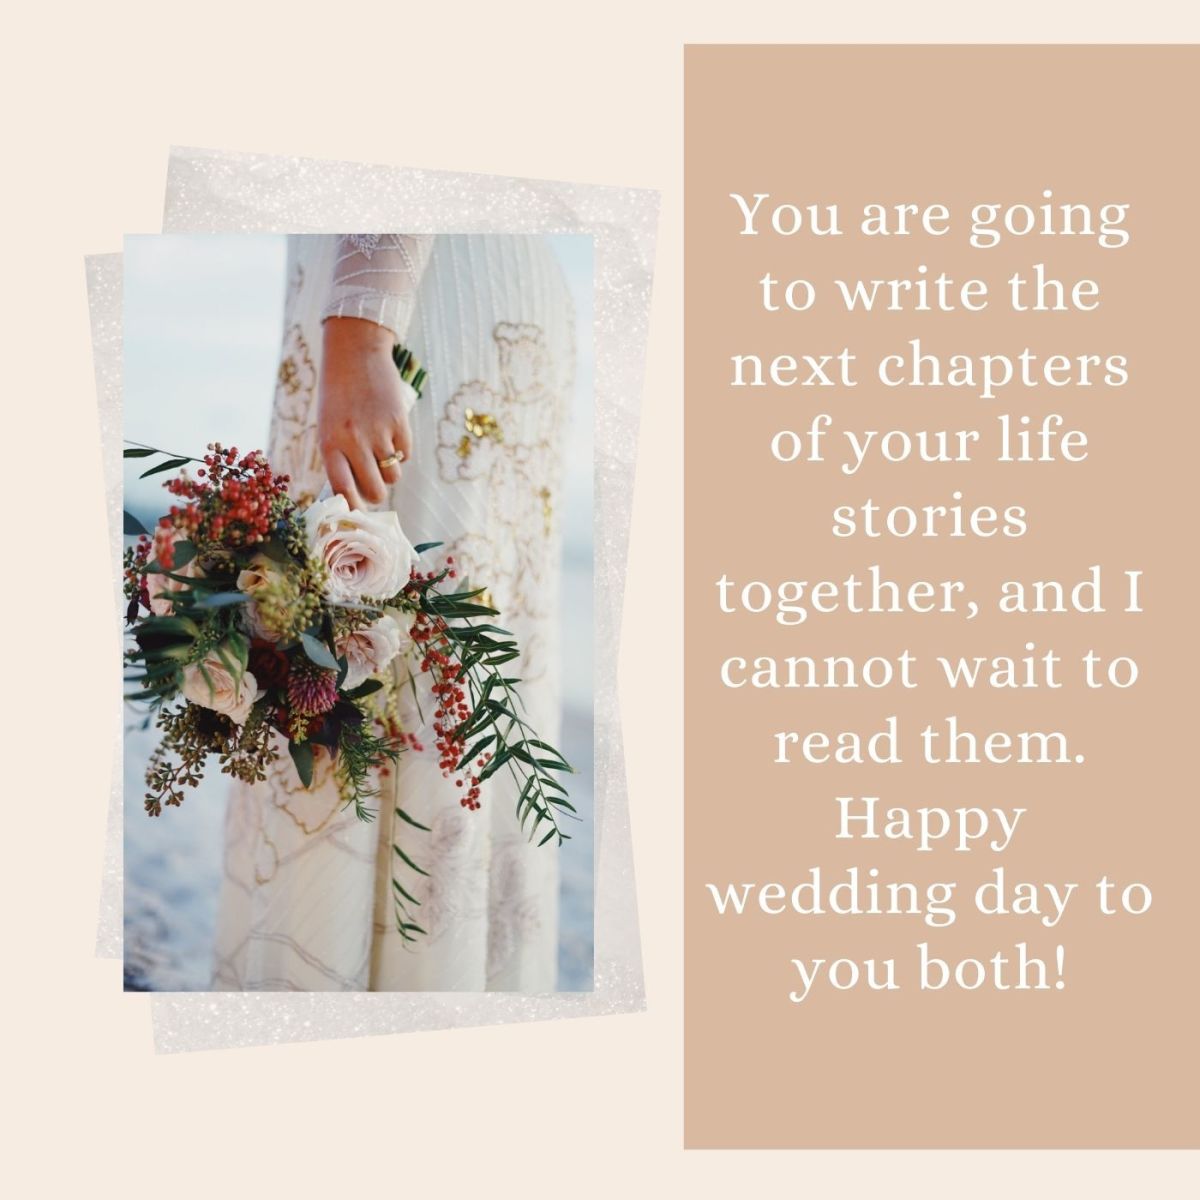 Top 70 Wedding Quotes And Wedding Wishes For Friend (With Images)